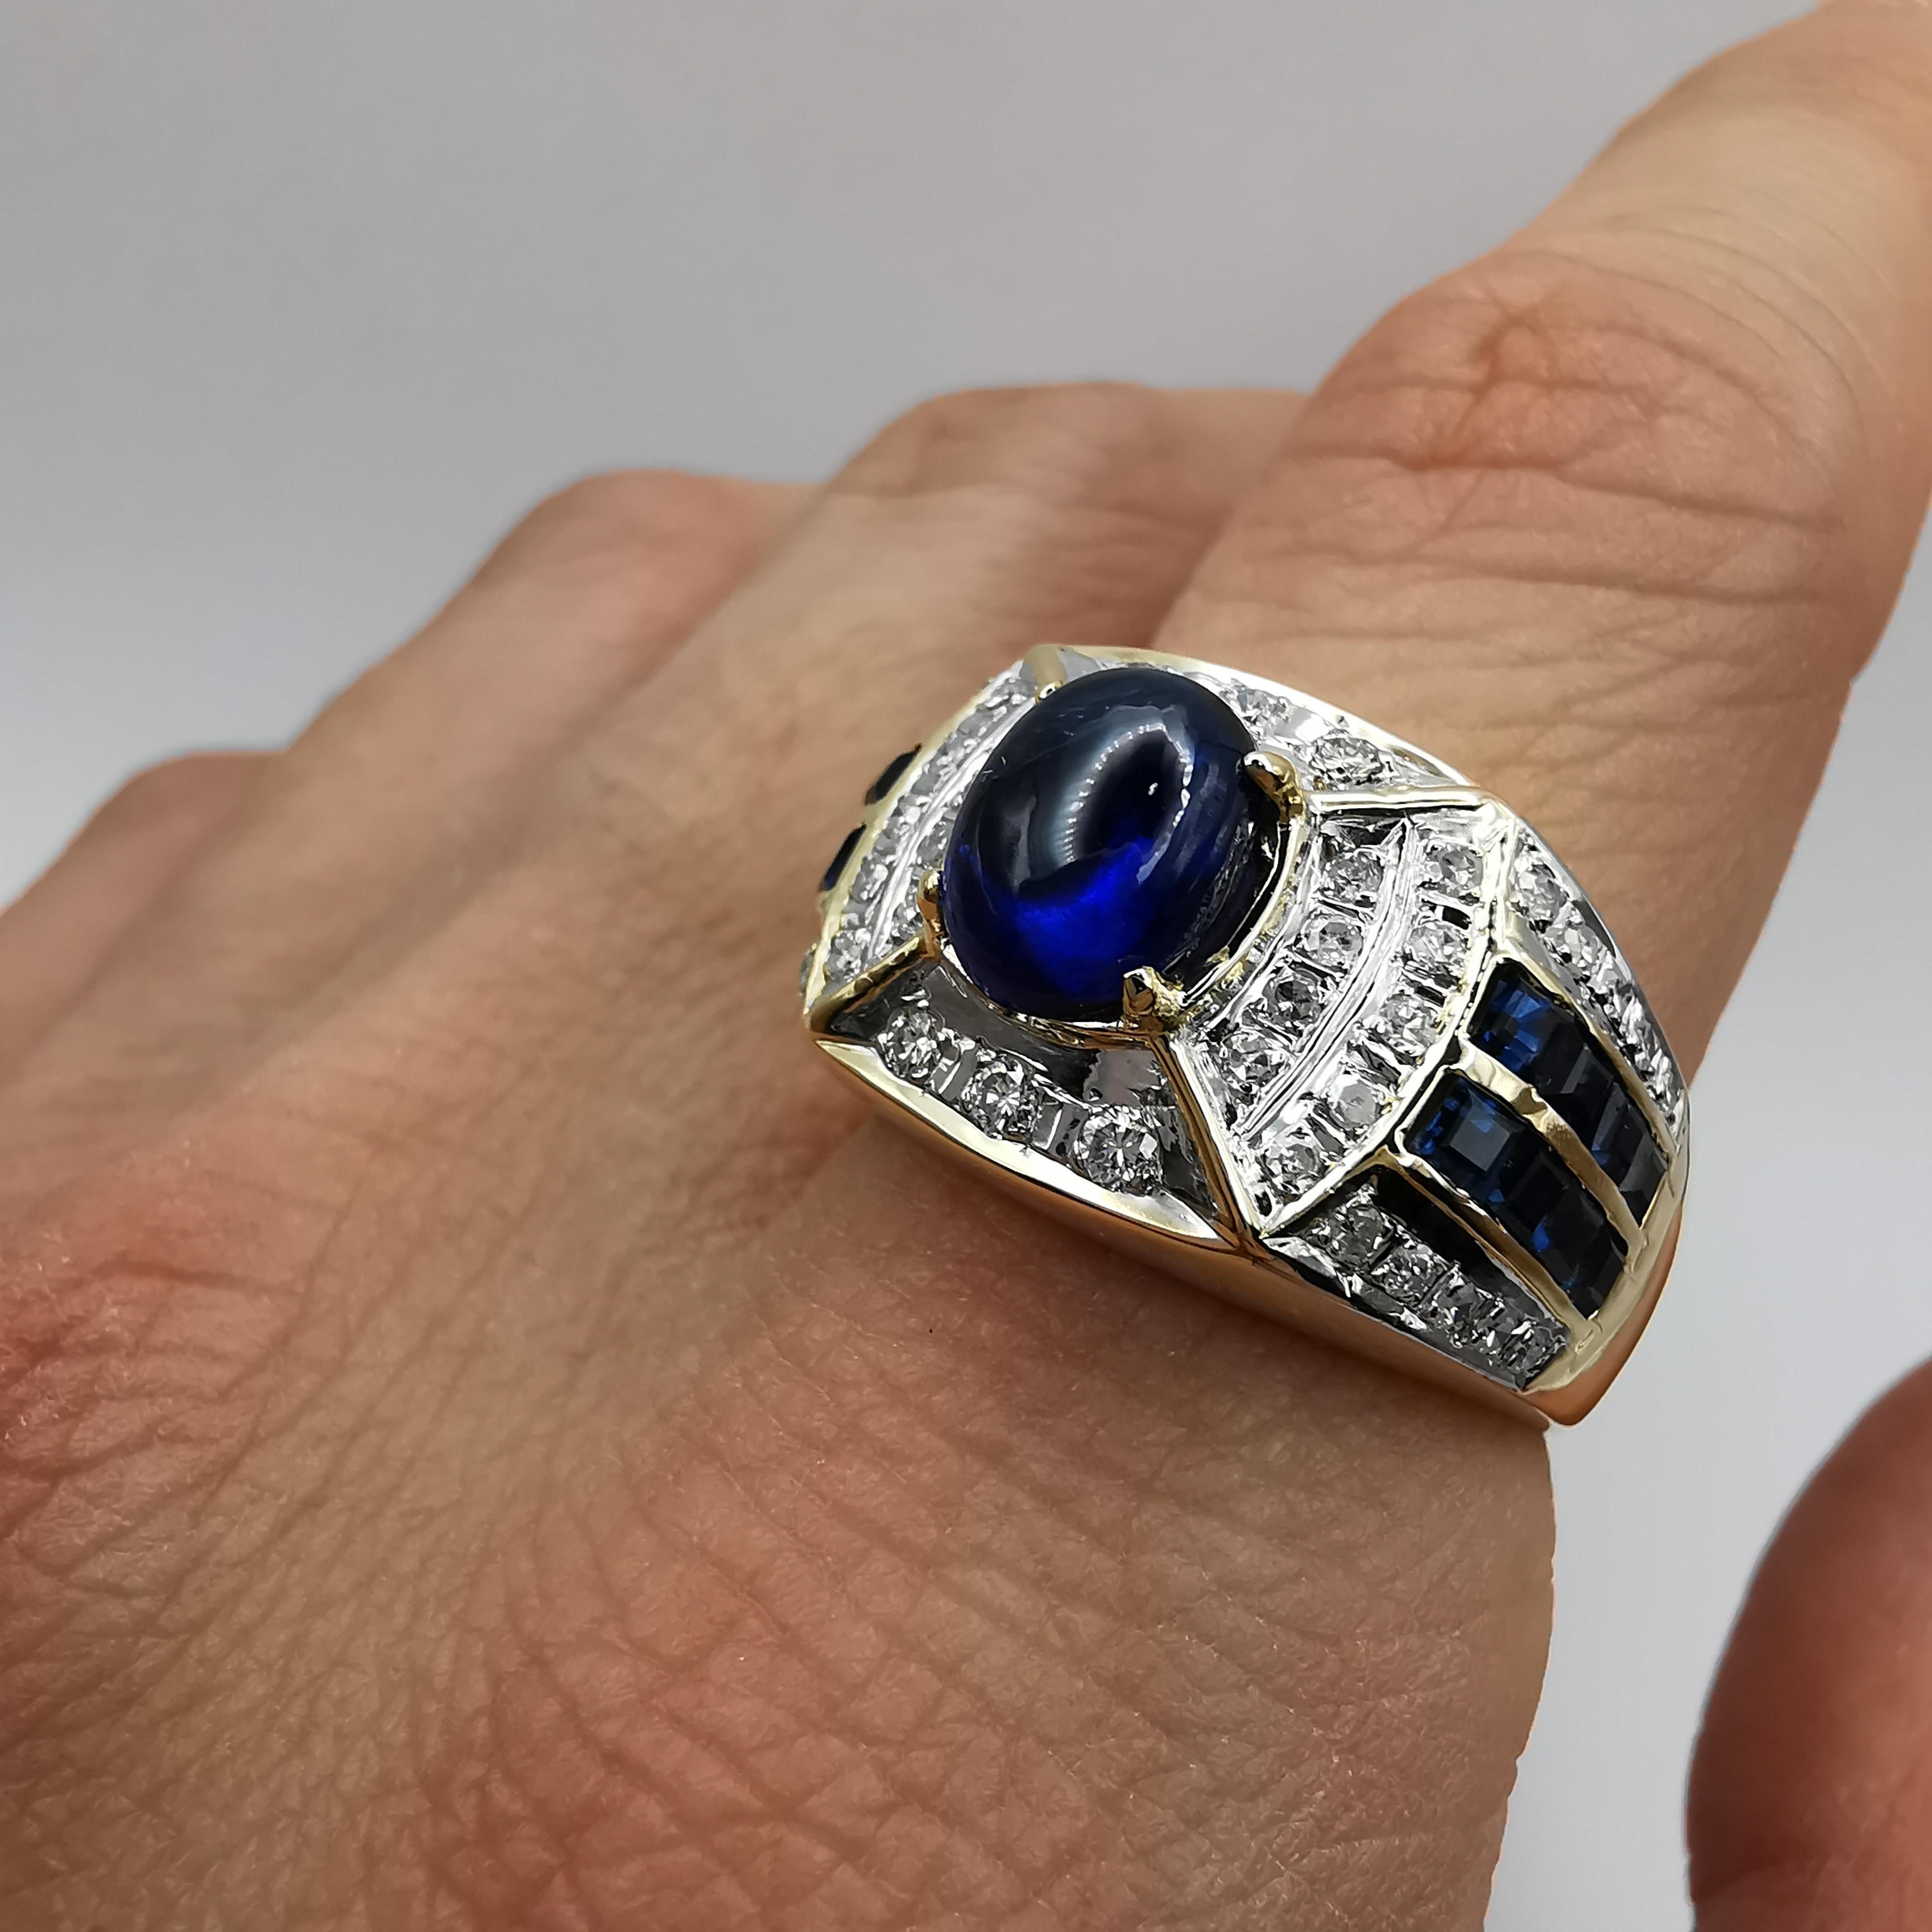 2.11ct Oval Cabochon Royal Blue Sapphire Diamond Art Deco Men's Ring in 14k Gold 5